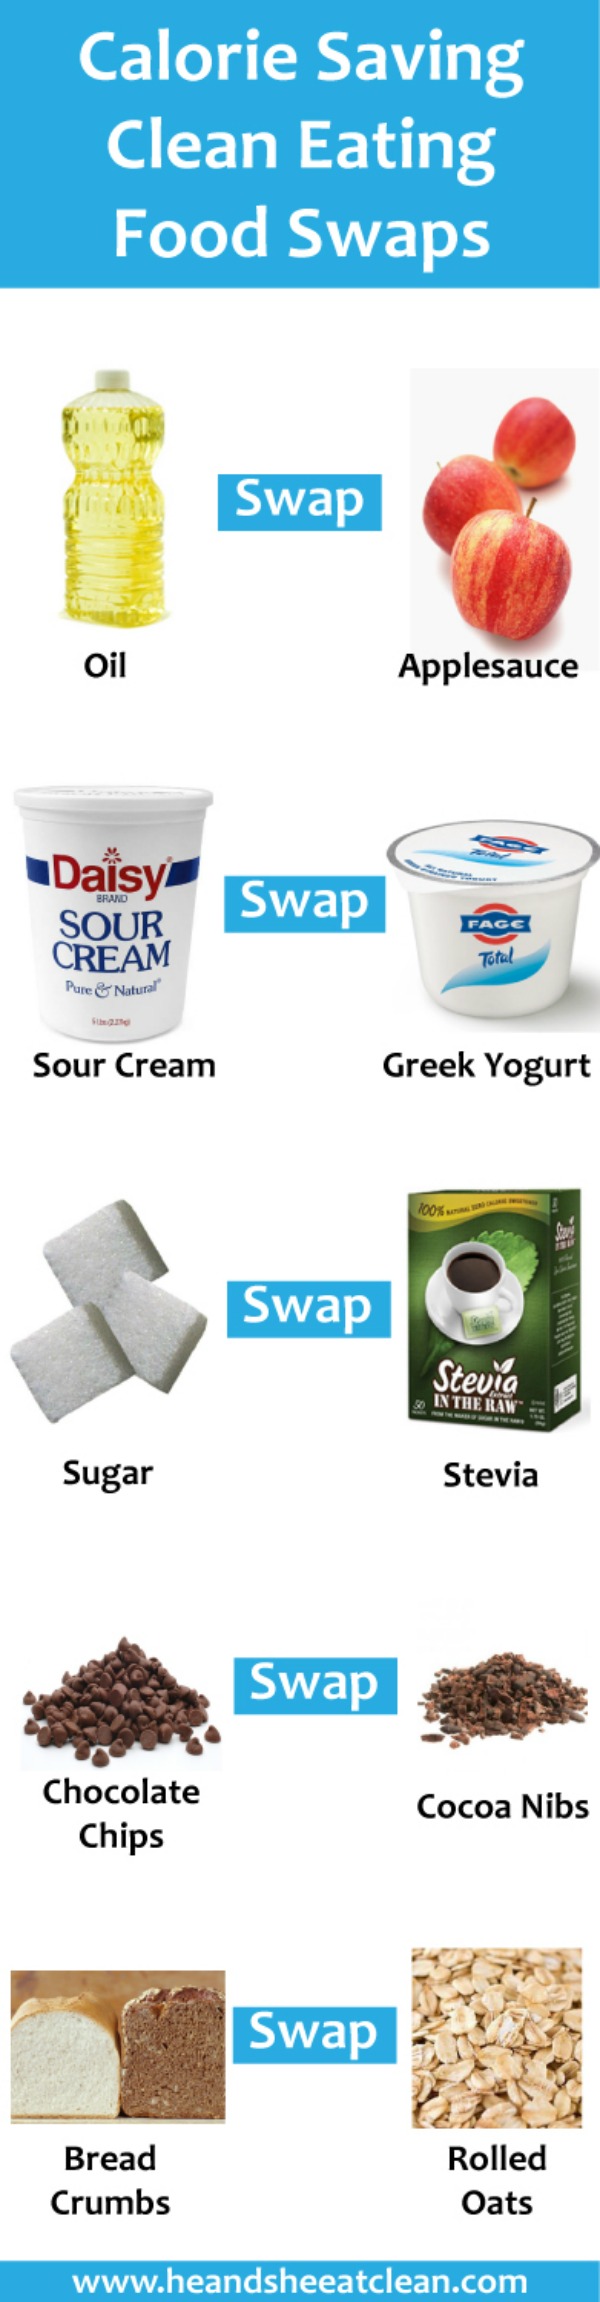 calorie saving clean eating food swaps infographic